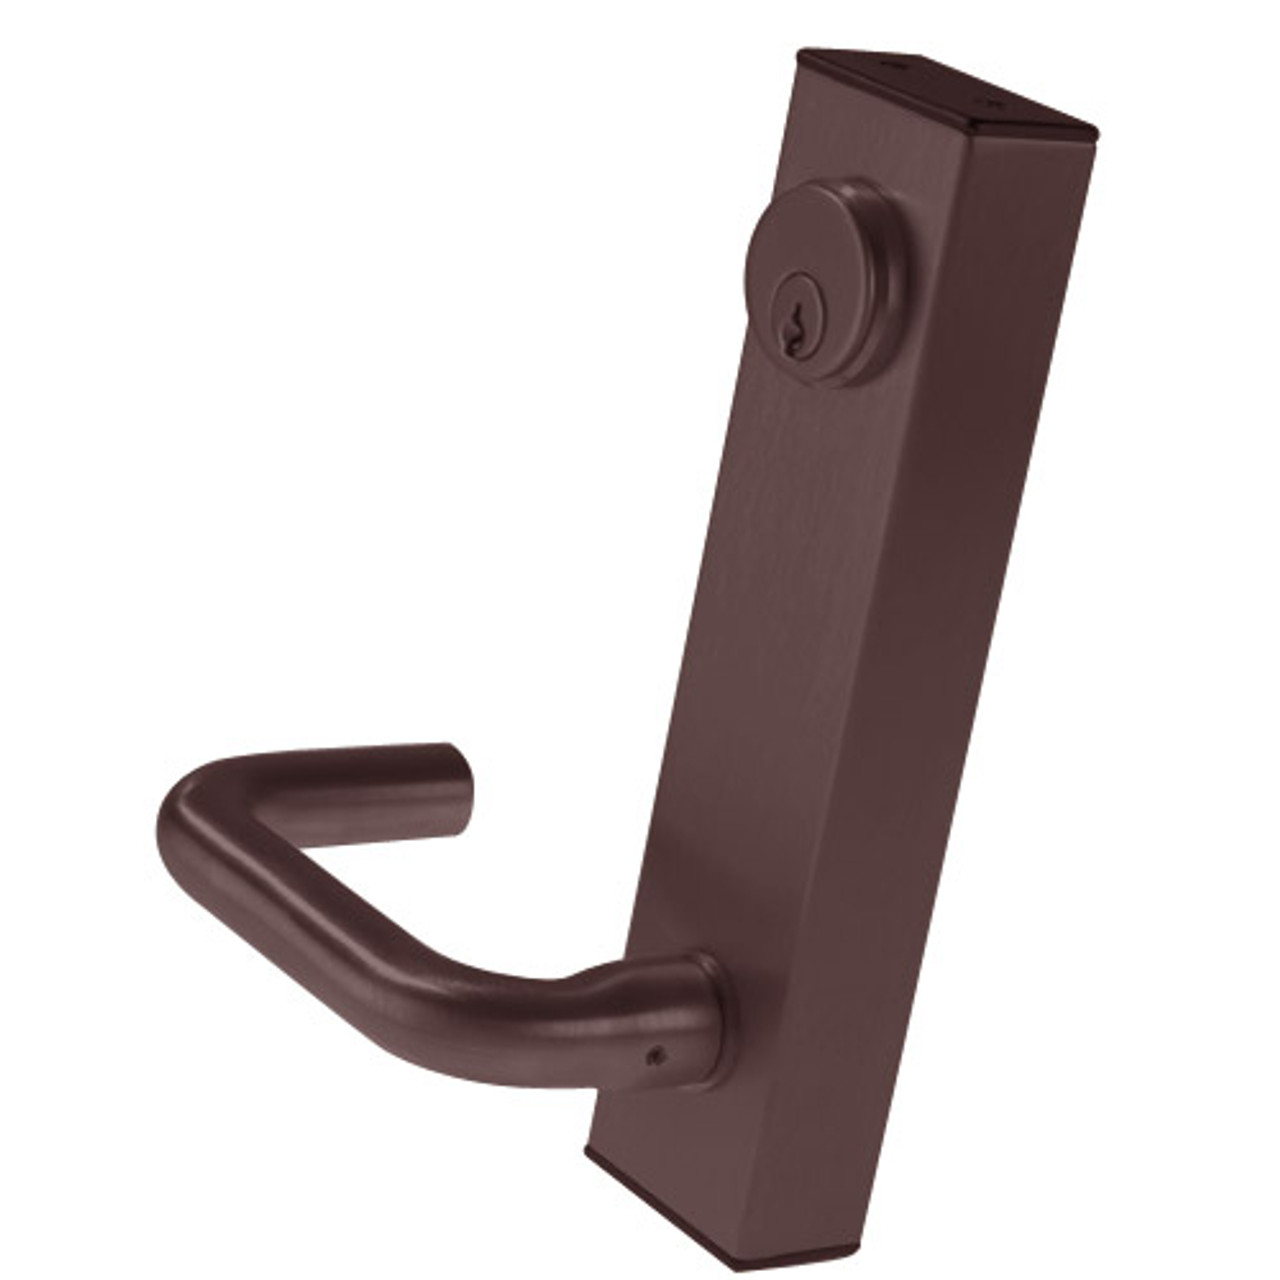 3080E-02-0-36-50 US10B Adams Rite Electrified Entry Trim with Round Lever in Oil Rubbed Bronze Finish